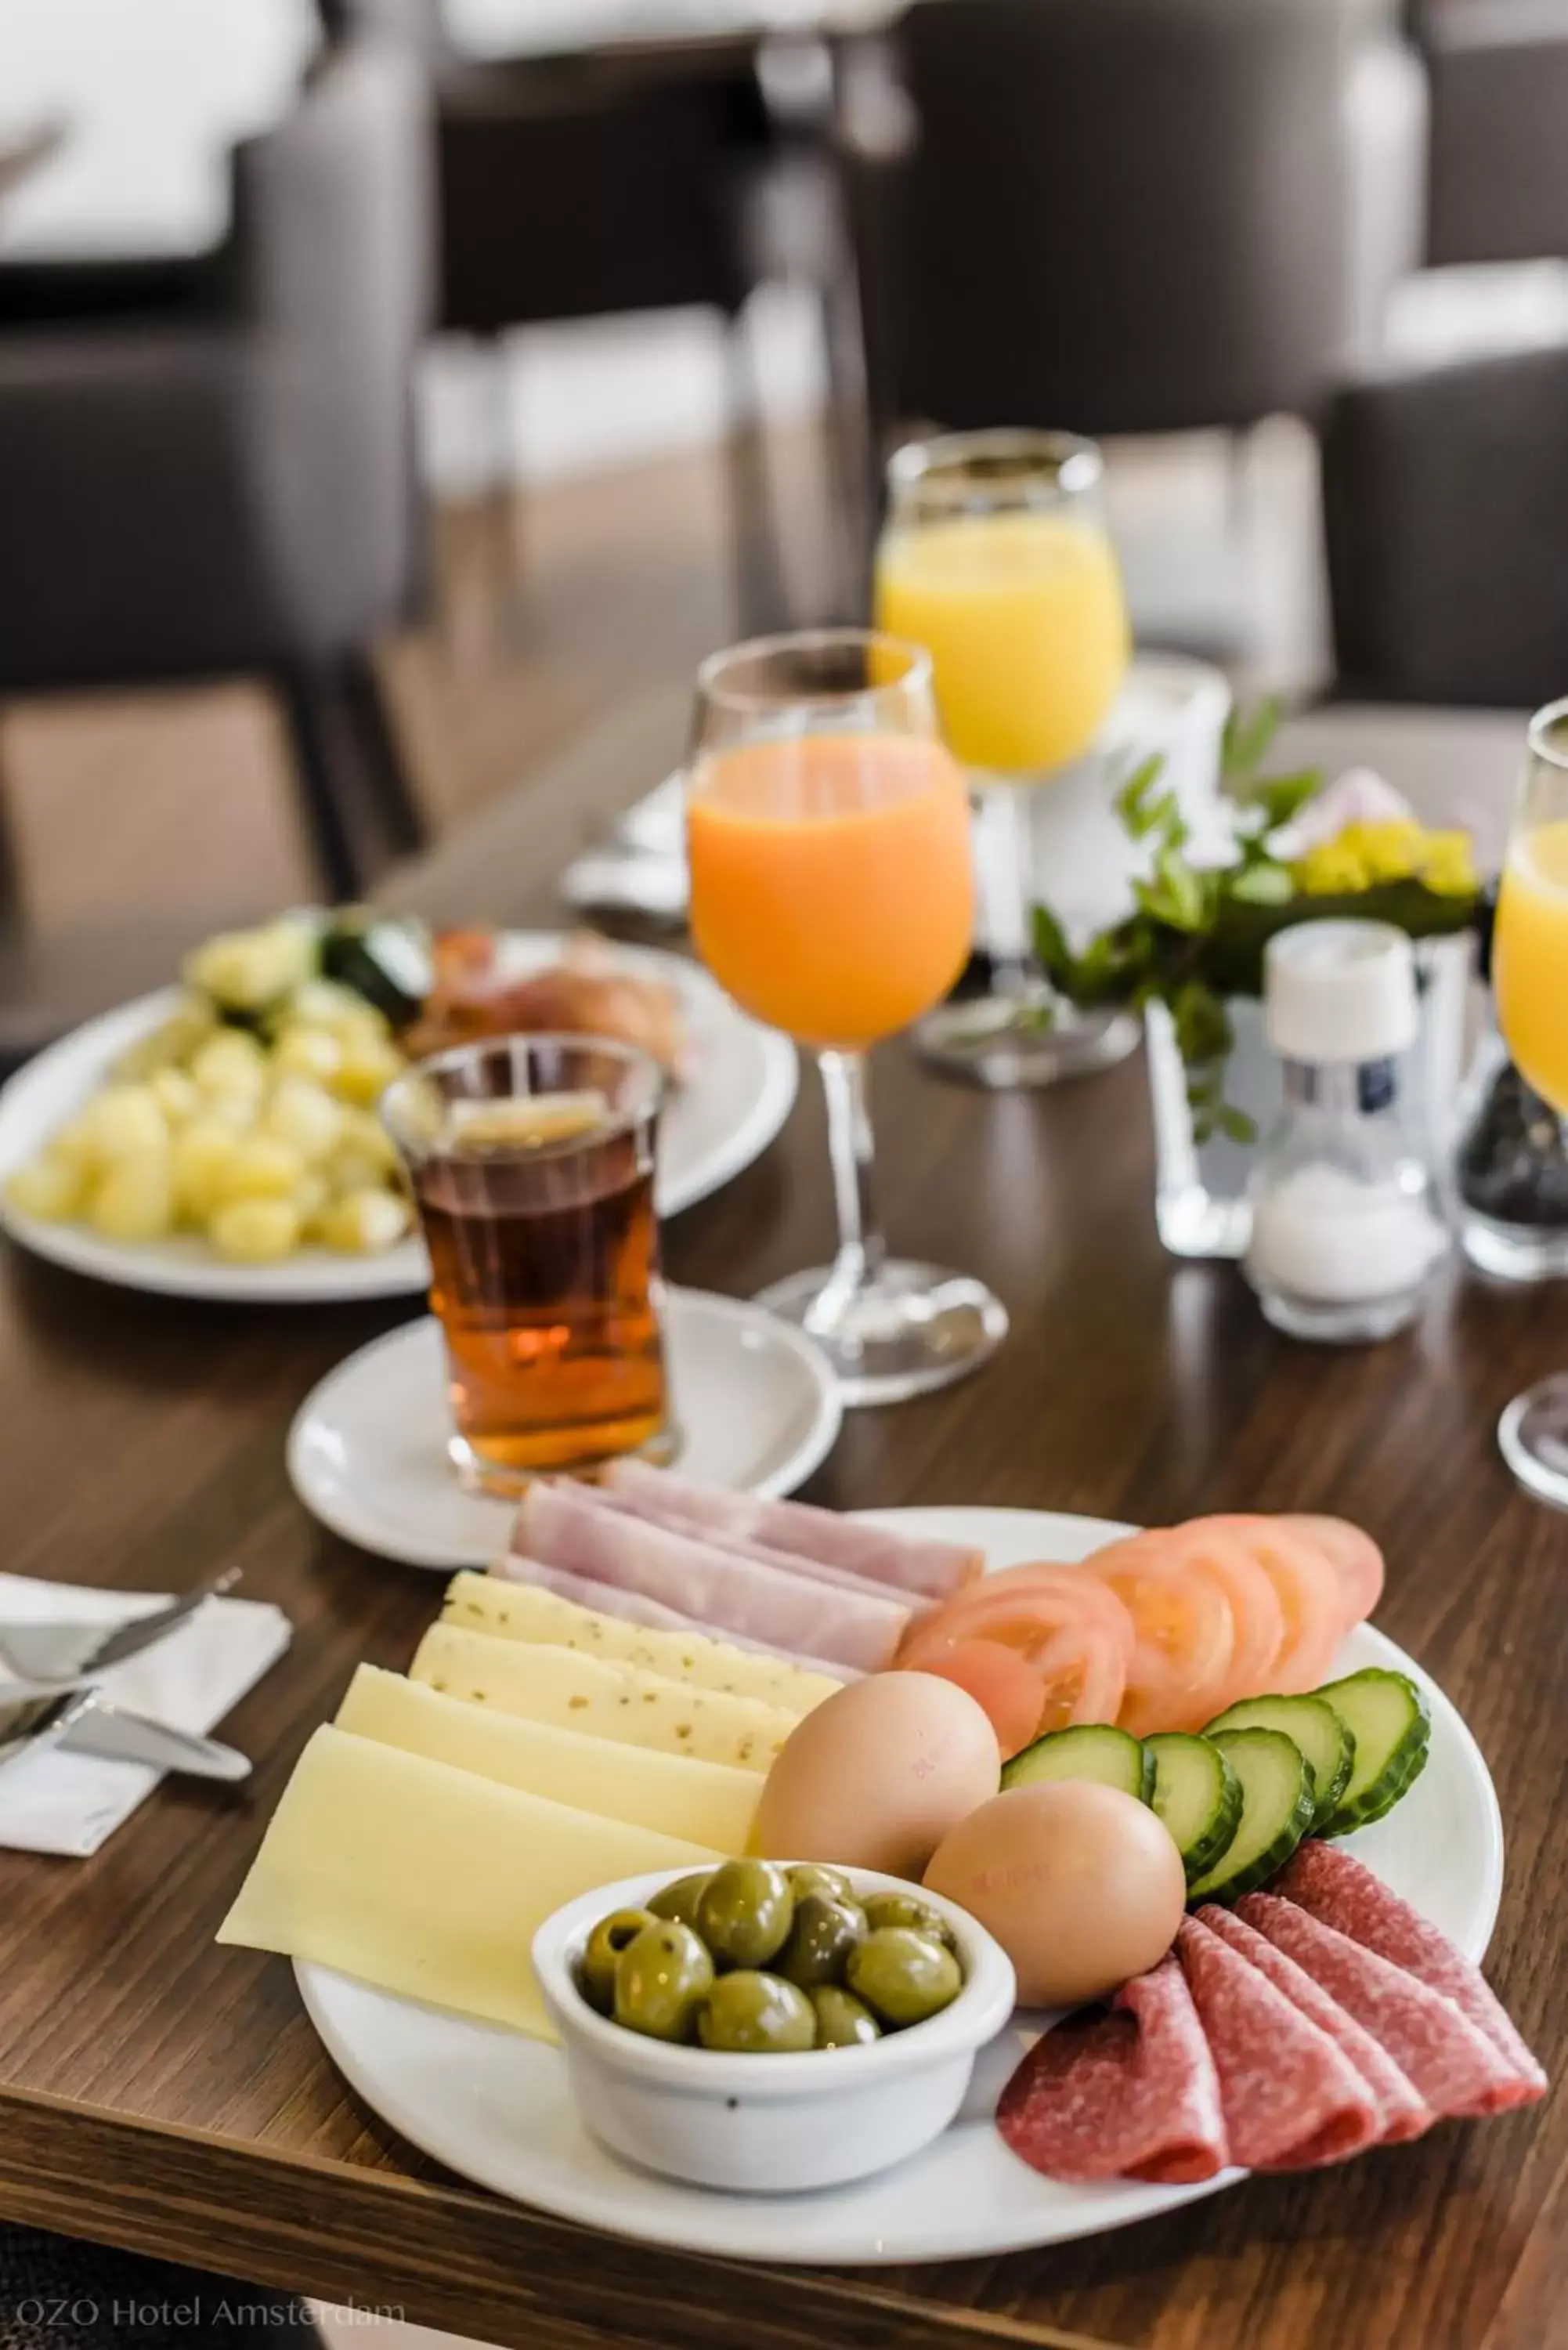 Food and drinks, Breakfast in OZO Hotels Arena Amsterdam